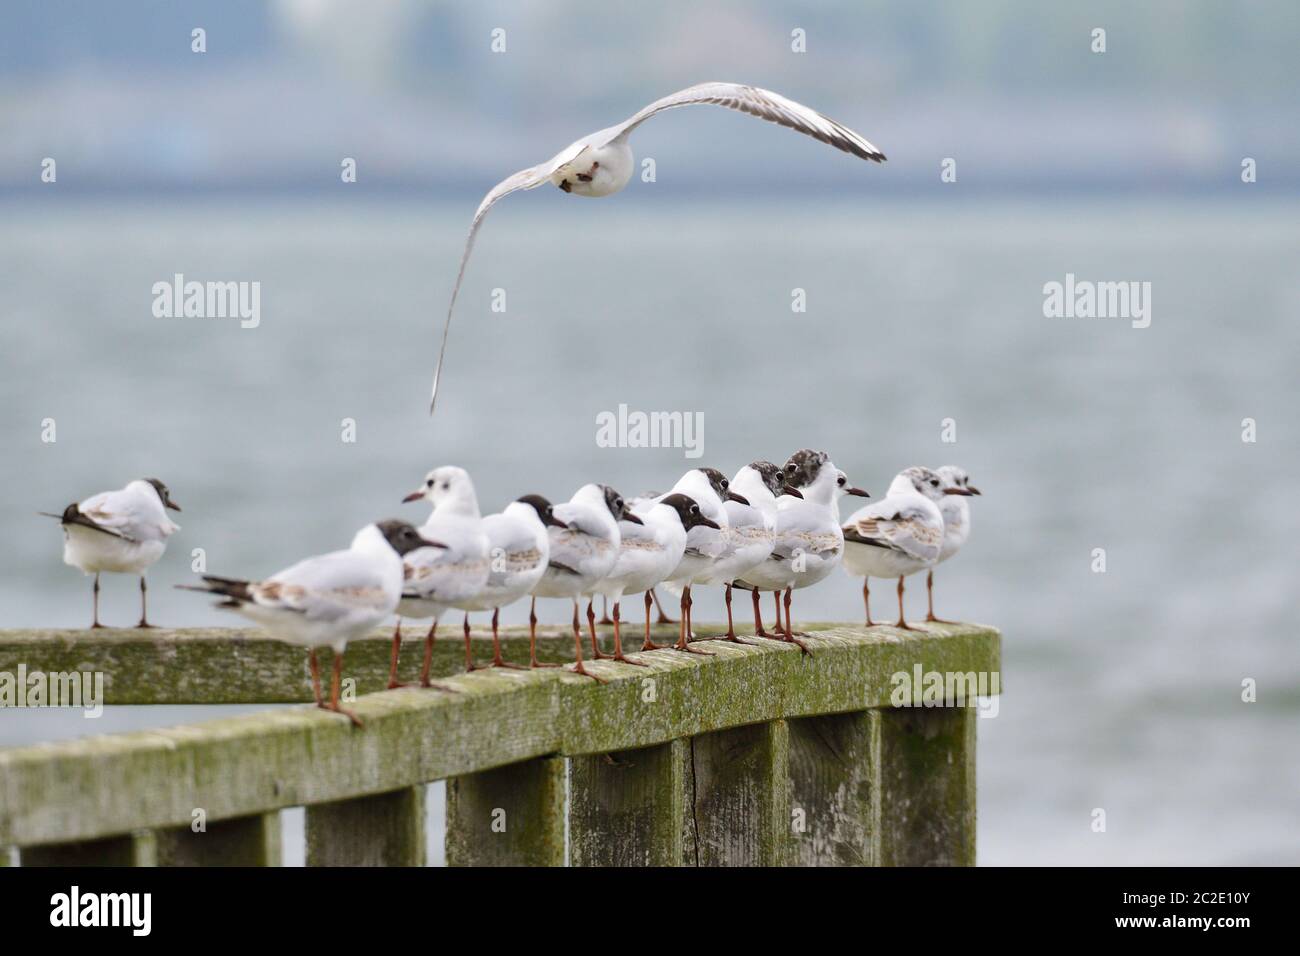 A swarm of Black-headed gull on the baltic sea Stock Photo